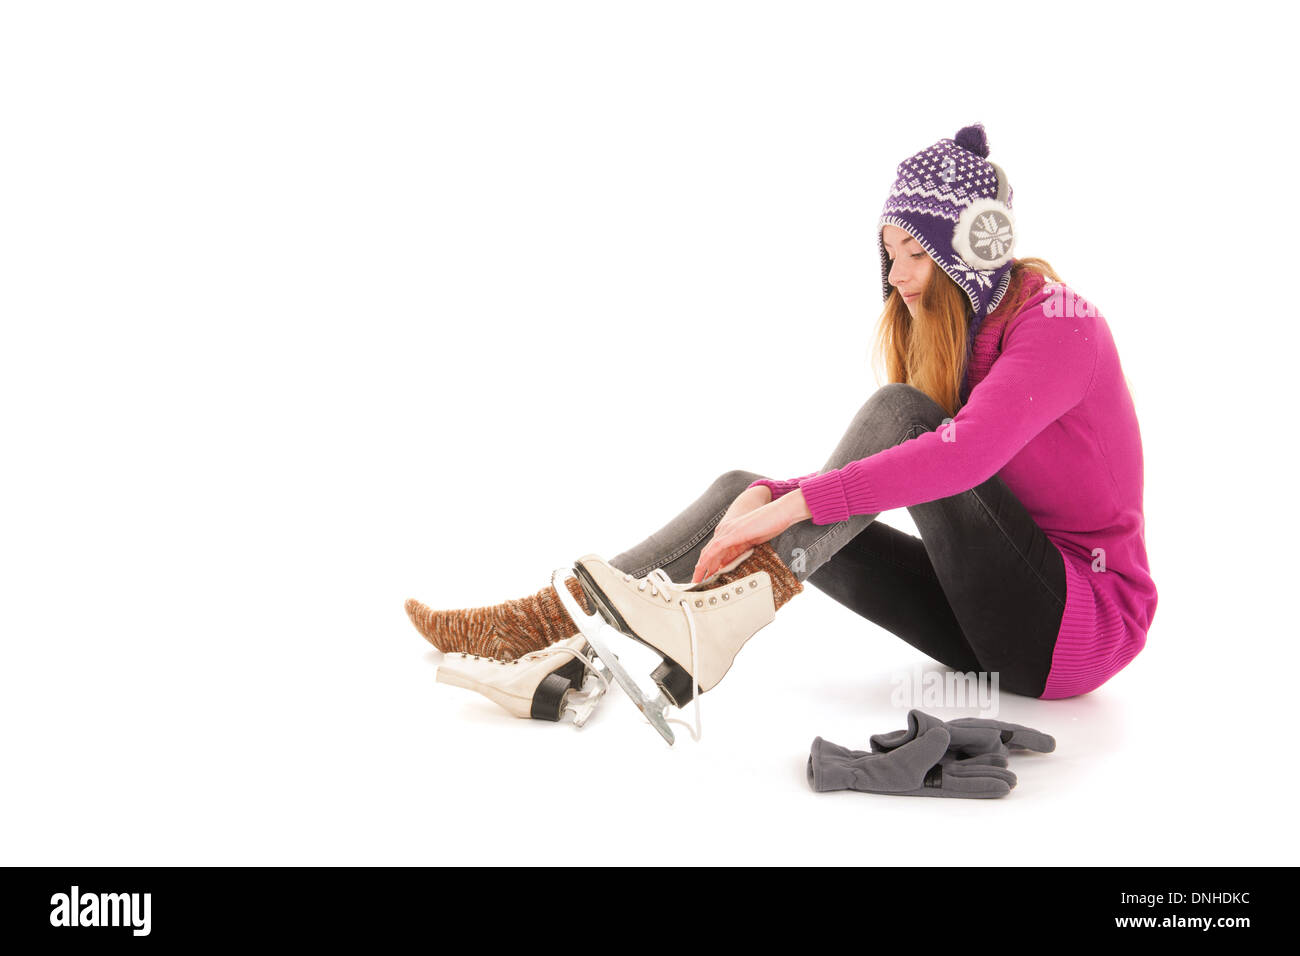 Attractive woman in pink put on the ice skates isolated over white background Stock Photo